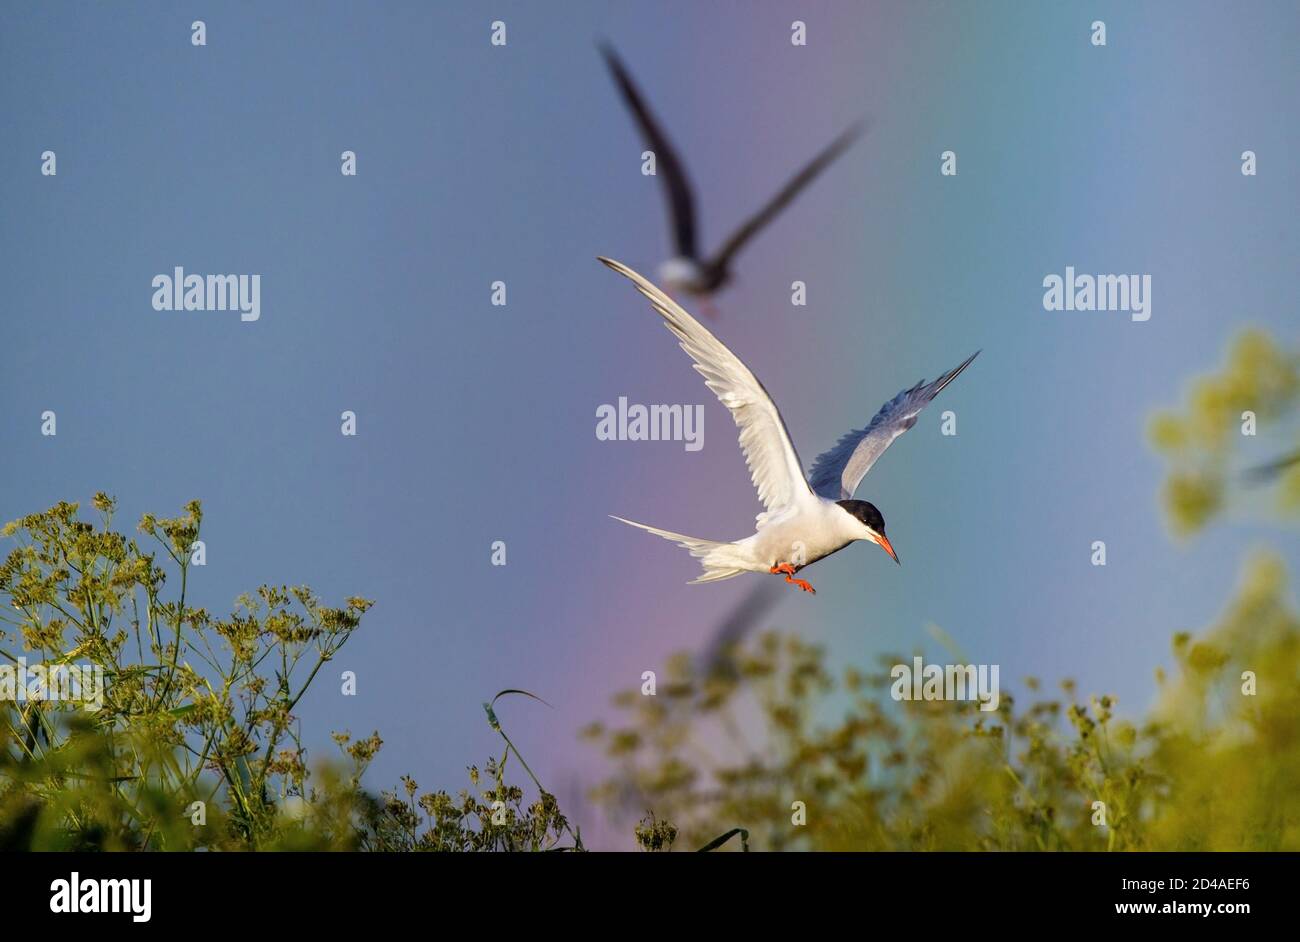 Adult common tern in flight on the rainbow and blue sky background.  Scientific name: Sterna hirundo. Stock Photo